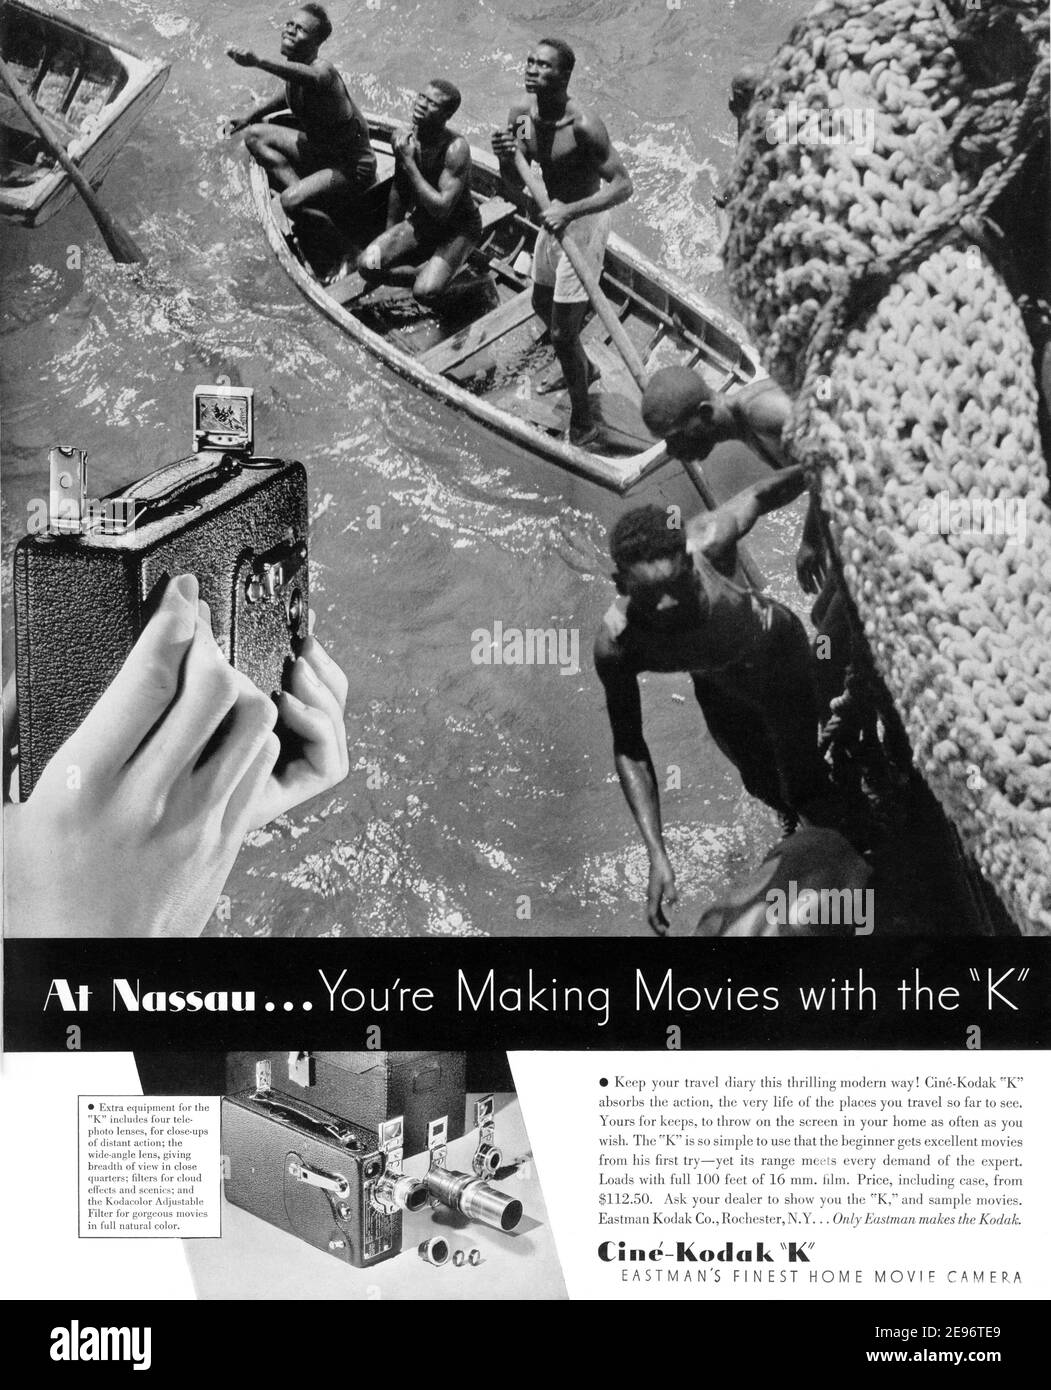 1935 Eastman Kodak's Cine-Kodak K 'At Nassau You're Making Movies With the K' Advertisement, retouched and revived, A3+, 600dpi Stock Photo